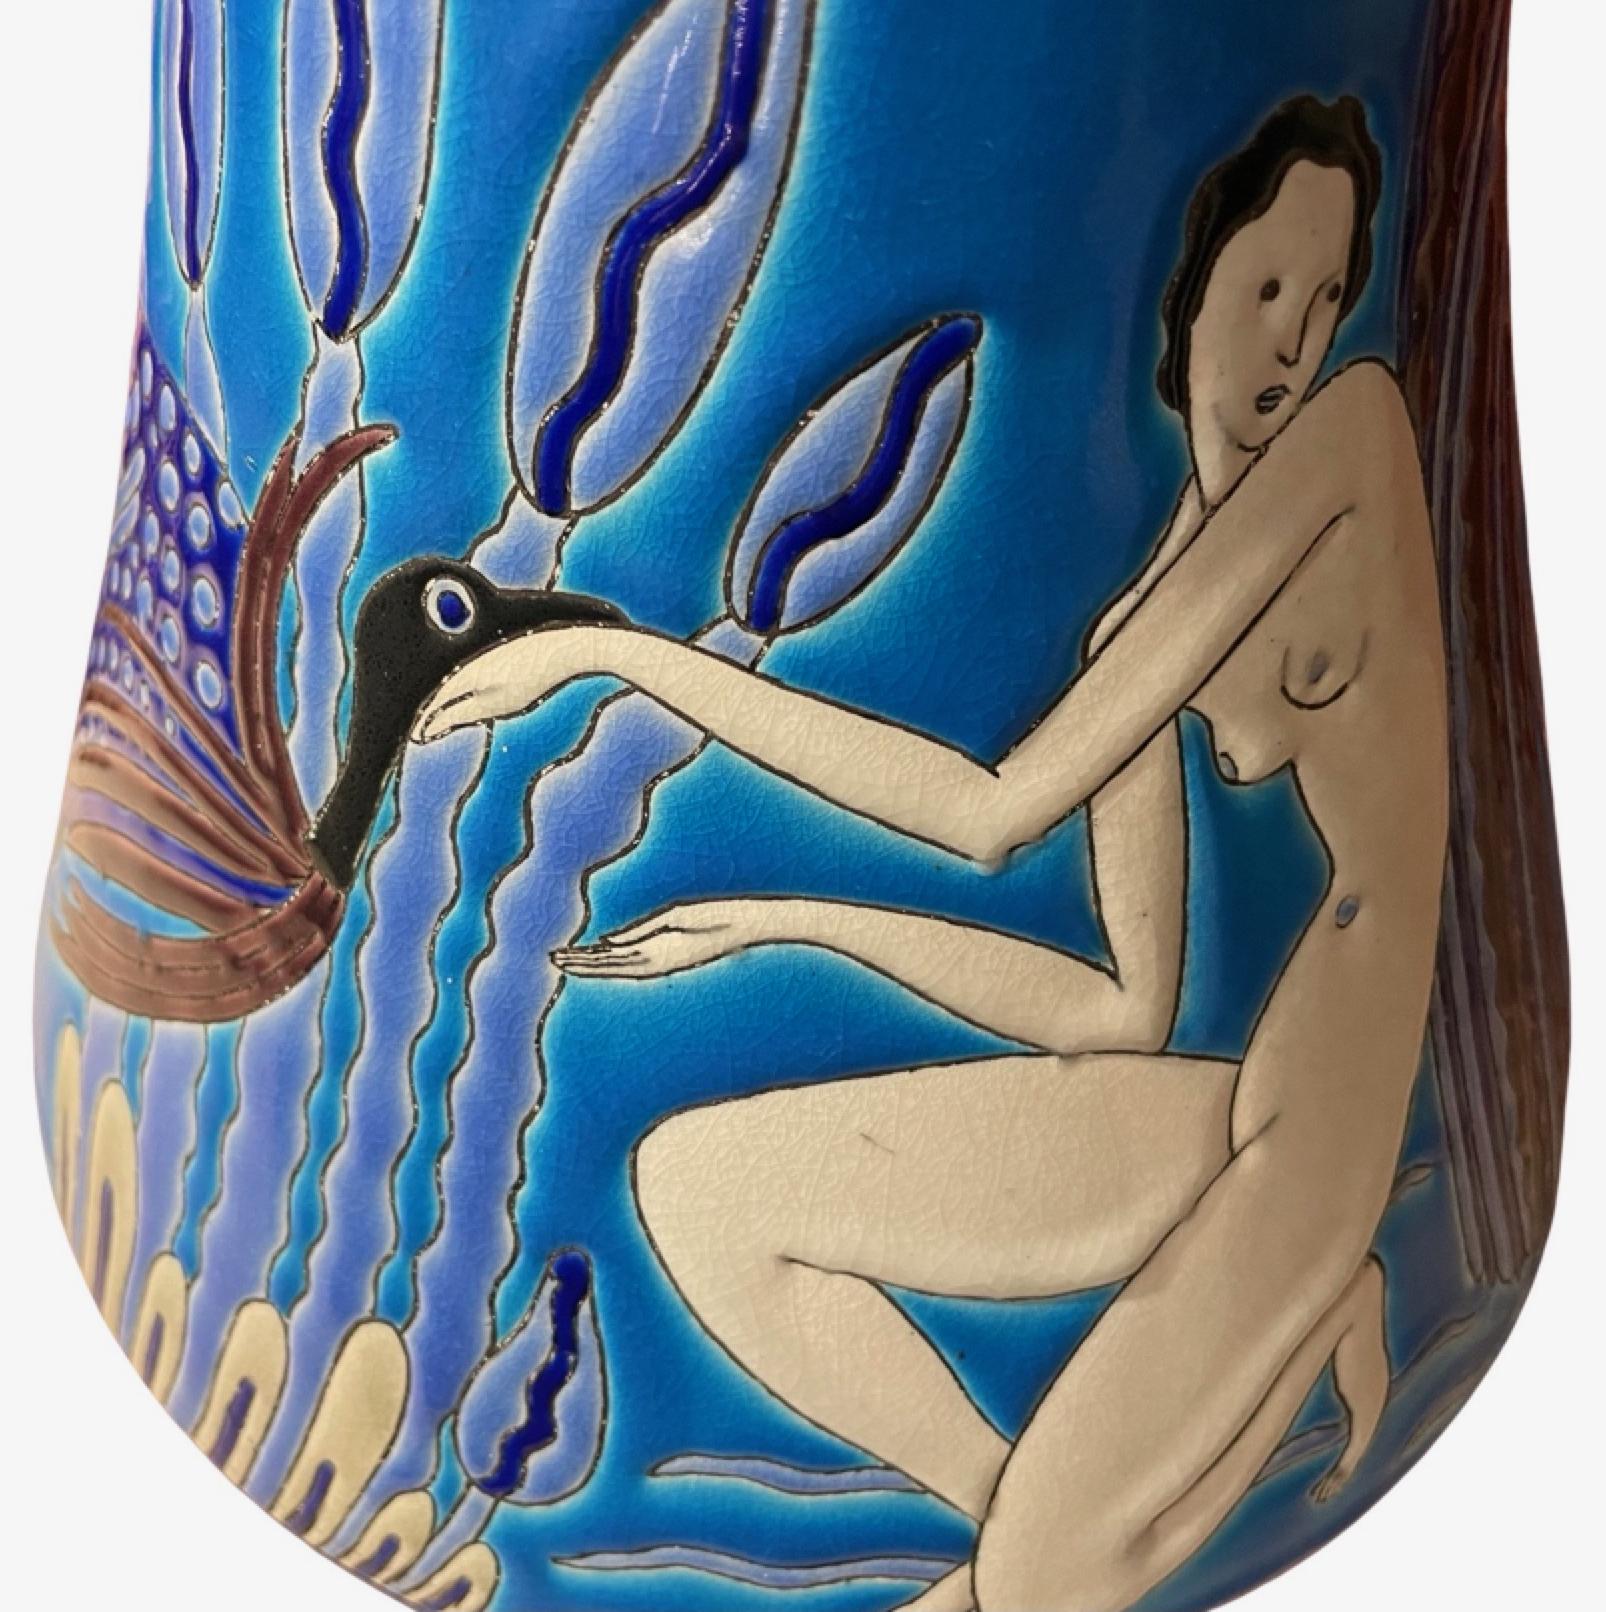 Early 20th Century Art Deco Ceramic Vase with Bathing Nudes by Primavera  Longwy 1925 France